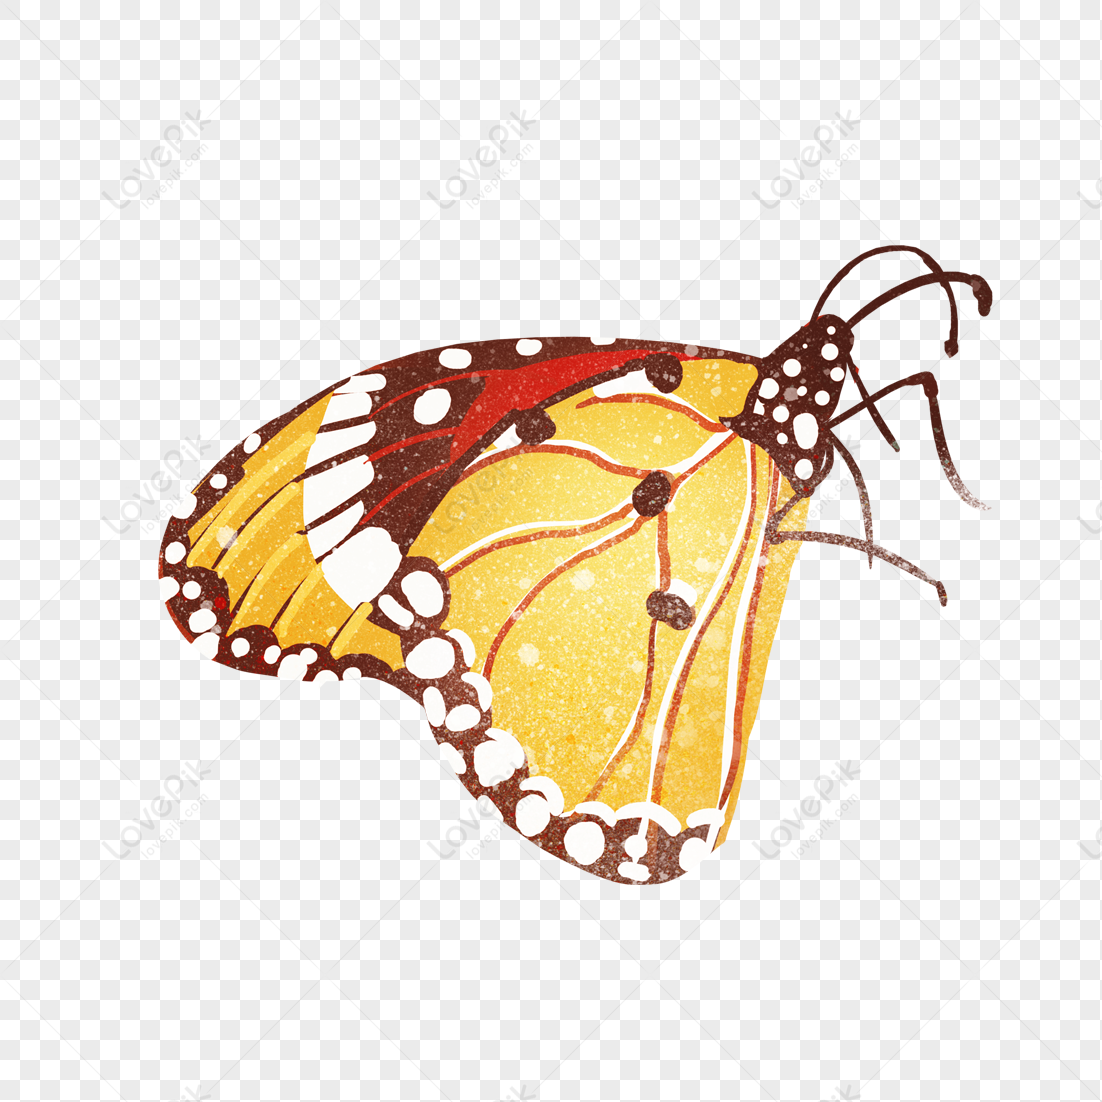 Butterfly PNG Transparent And Clipart Image For Free Download - Lovepik ...